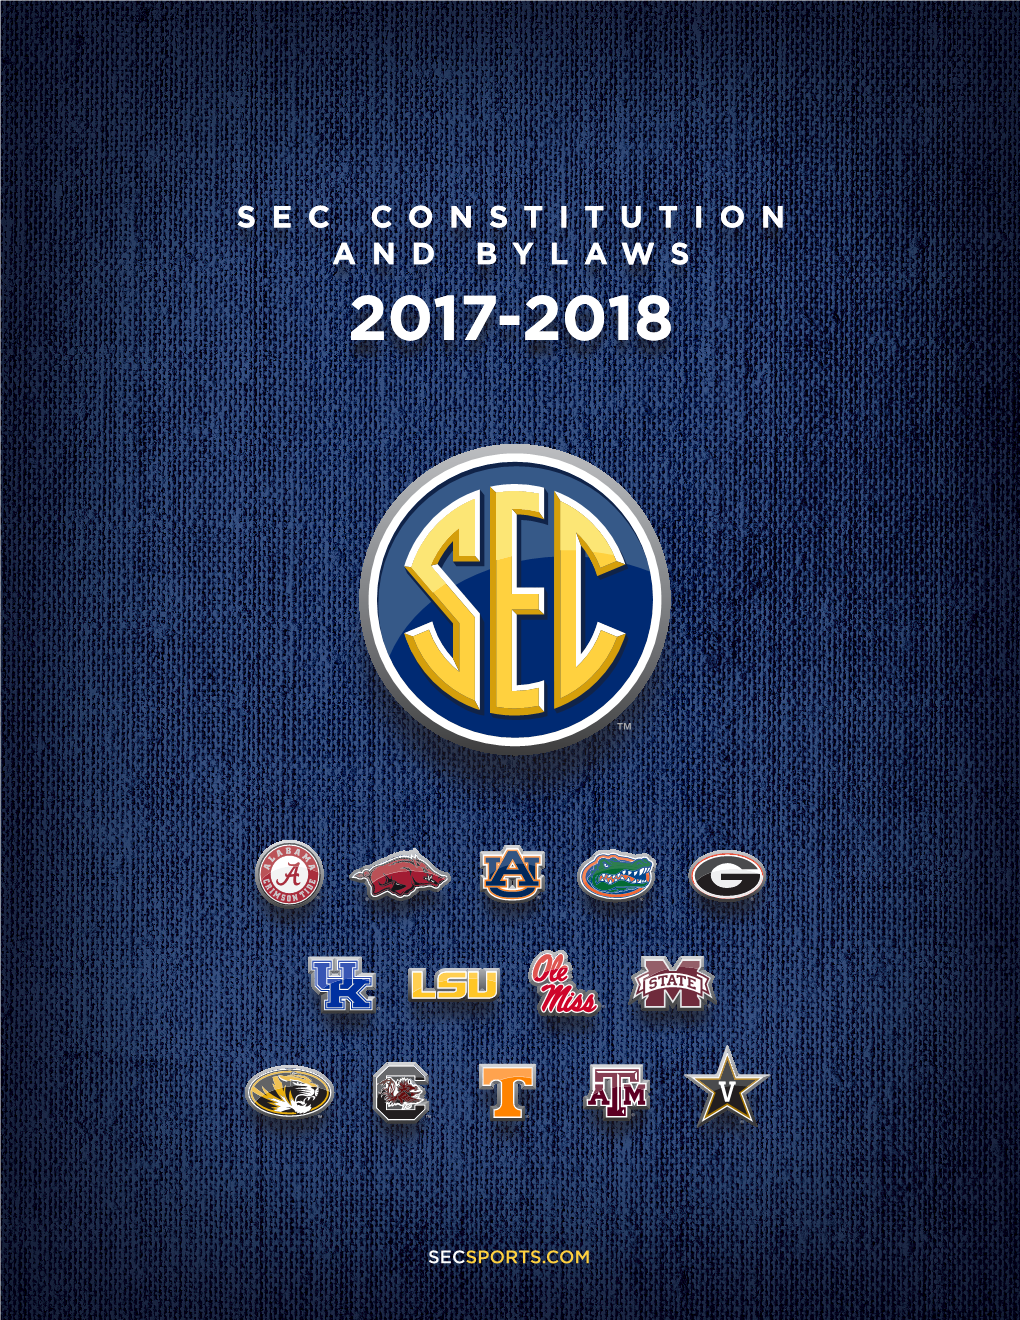 Sec Constitution and Bylaws 2017-2018